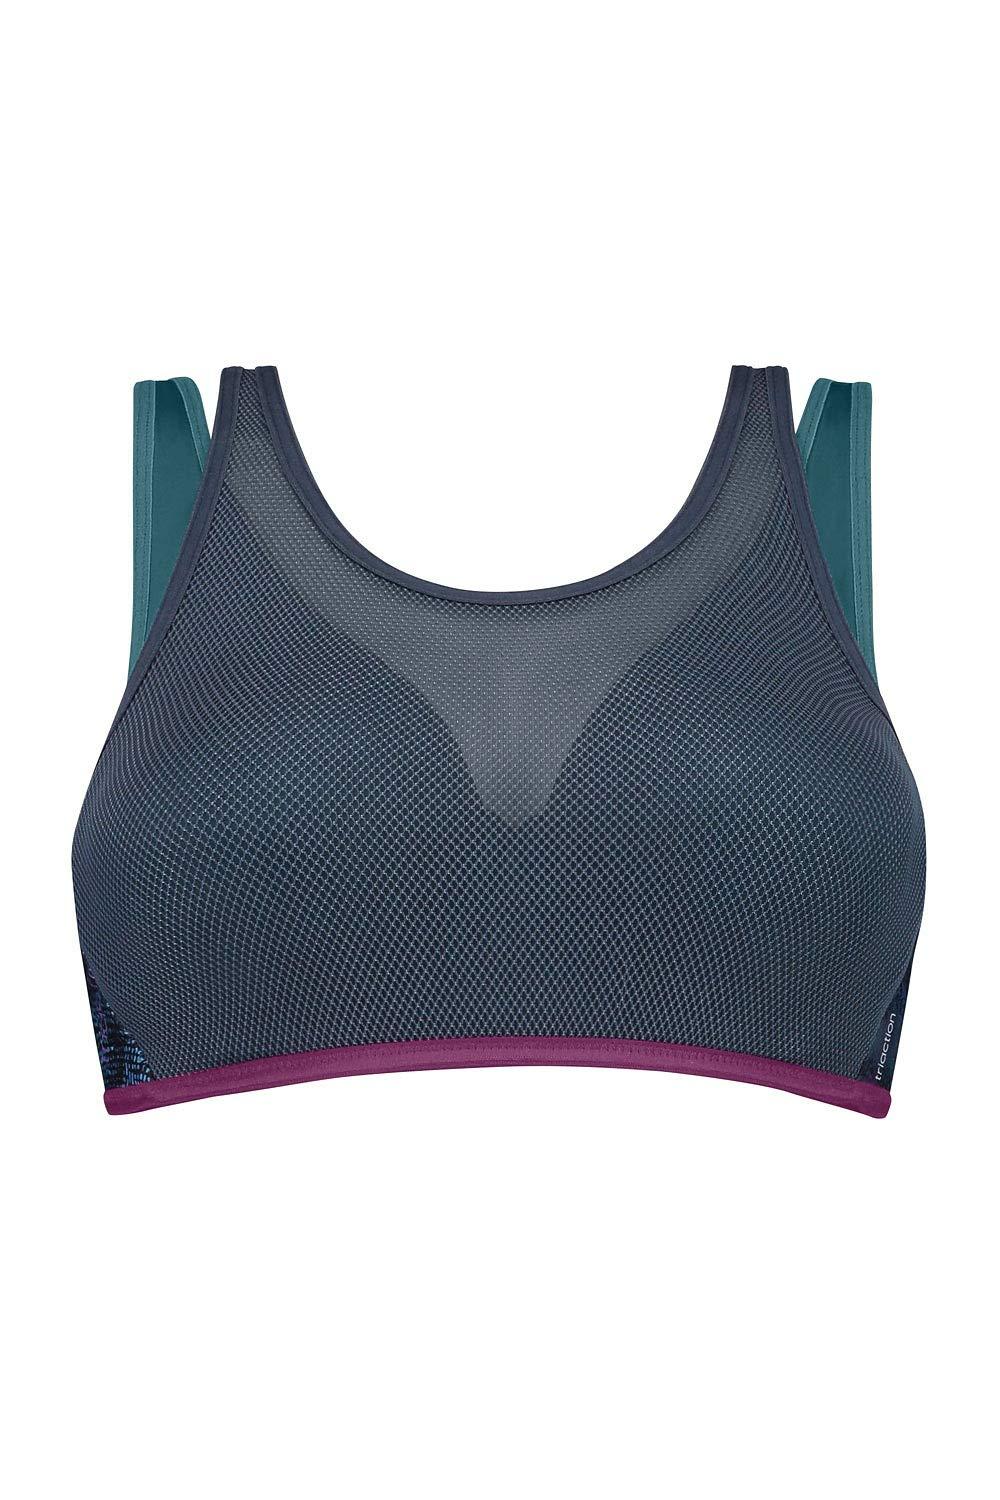 Triumph Triaction Magic Motion MWP Pro Wired Padded Sports Bra 10165790 RRP  £36